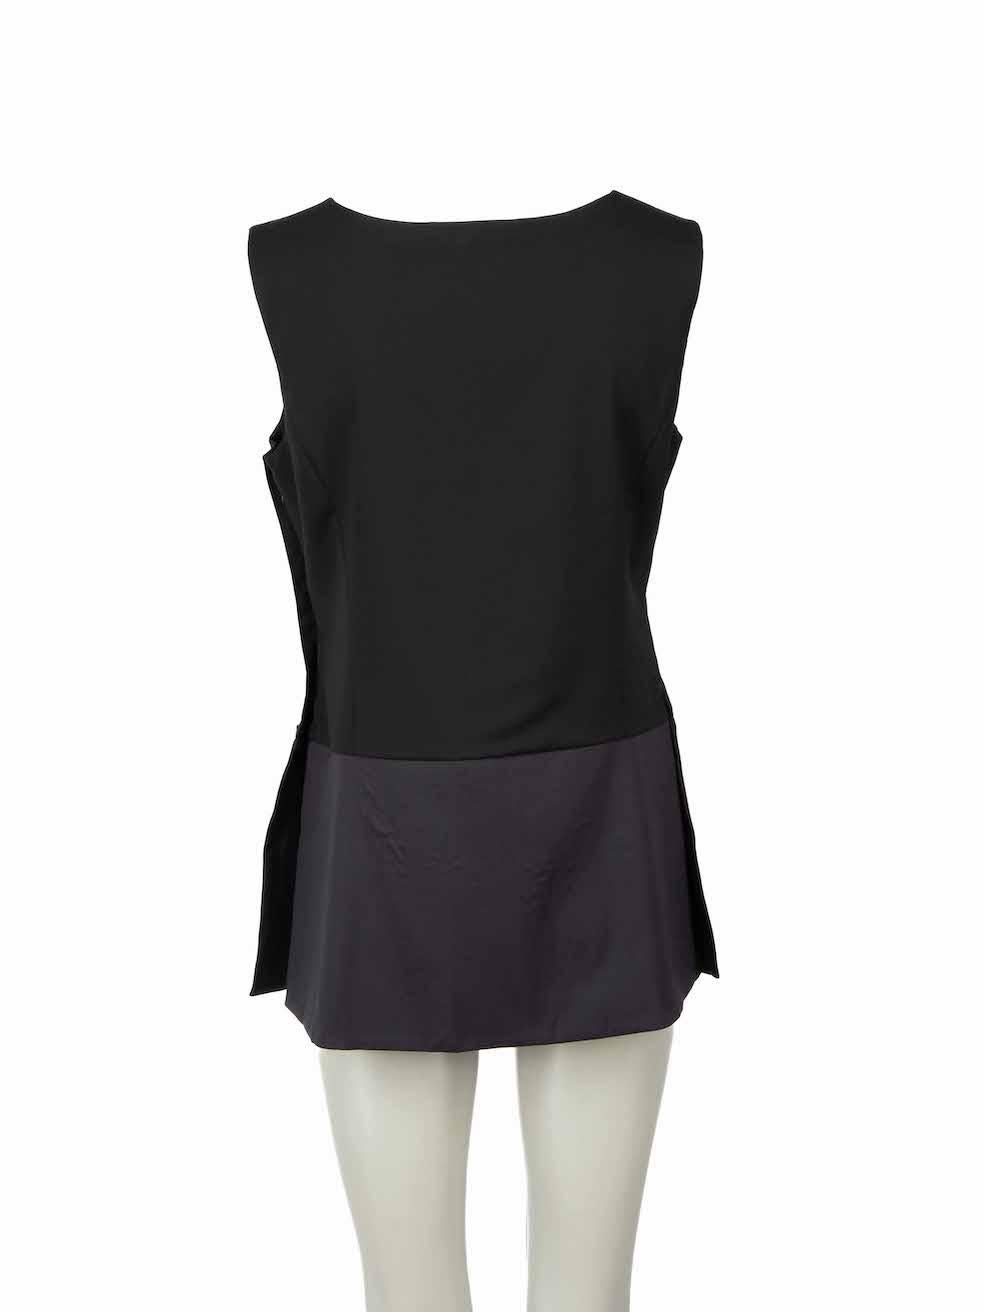 Jil Sander Black Wool Sleeveless Panel Top Size L In Excellent Condition In London, GB